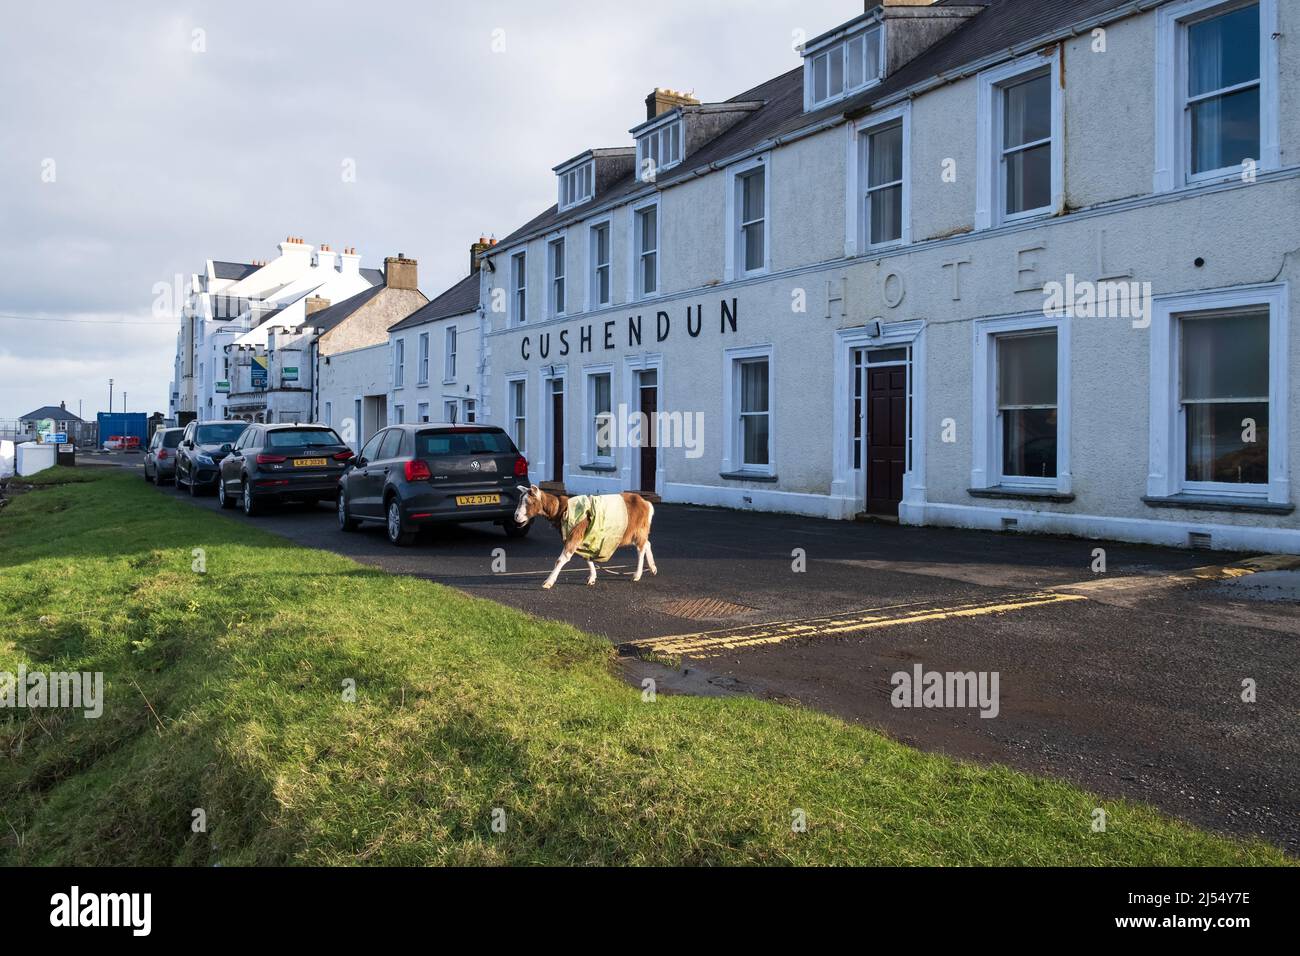 Goat in high visibility jacket walking towards the grass verge outside the Cushendun Hotel in Co. Antrim Northern Ireland Stock Photo